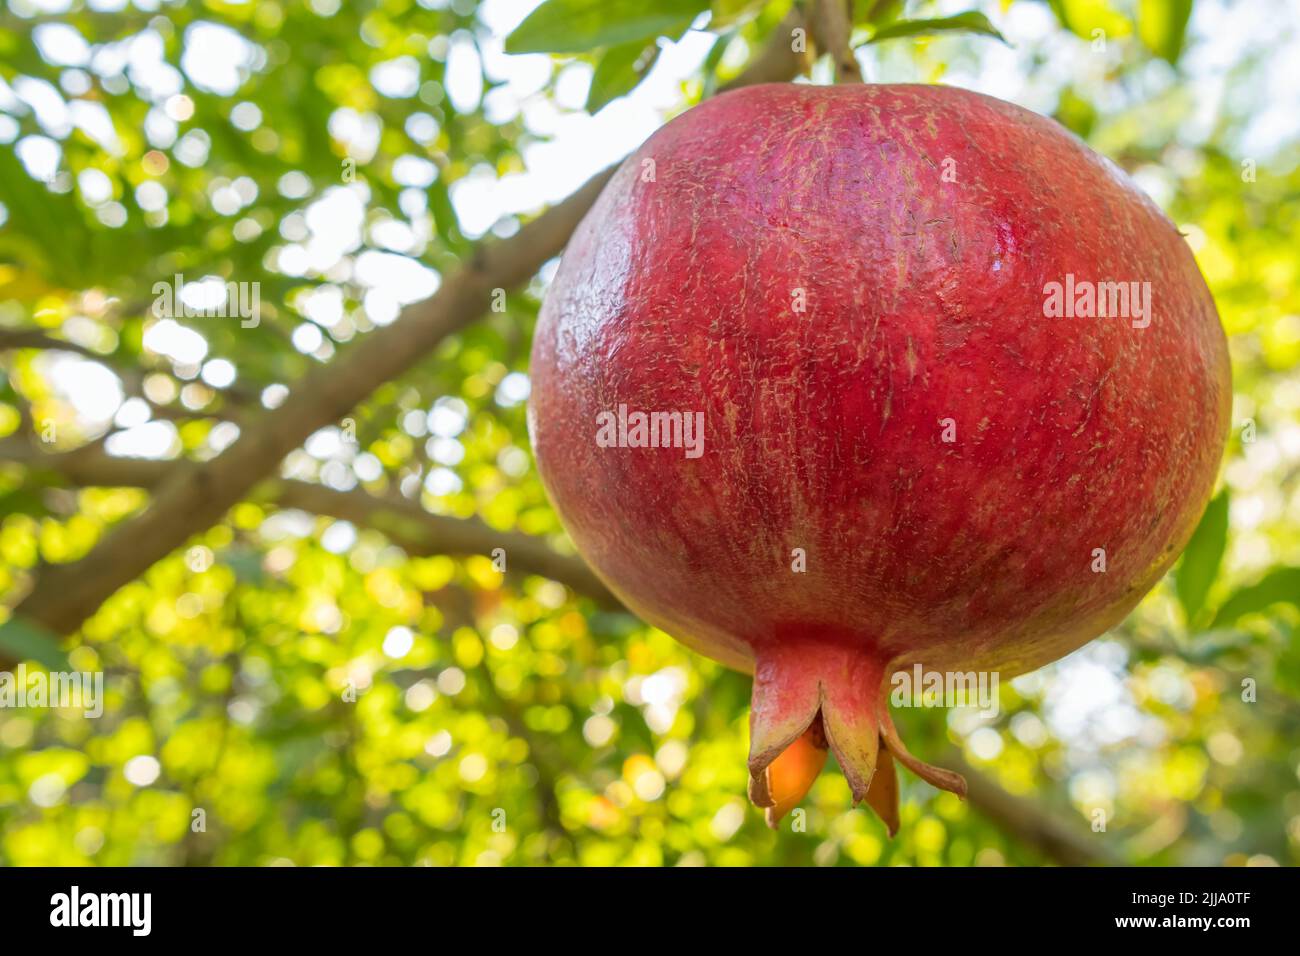 Ripe pomegranate fruit close-up on a tree branch in garden Stock Photo